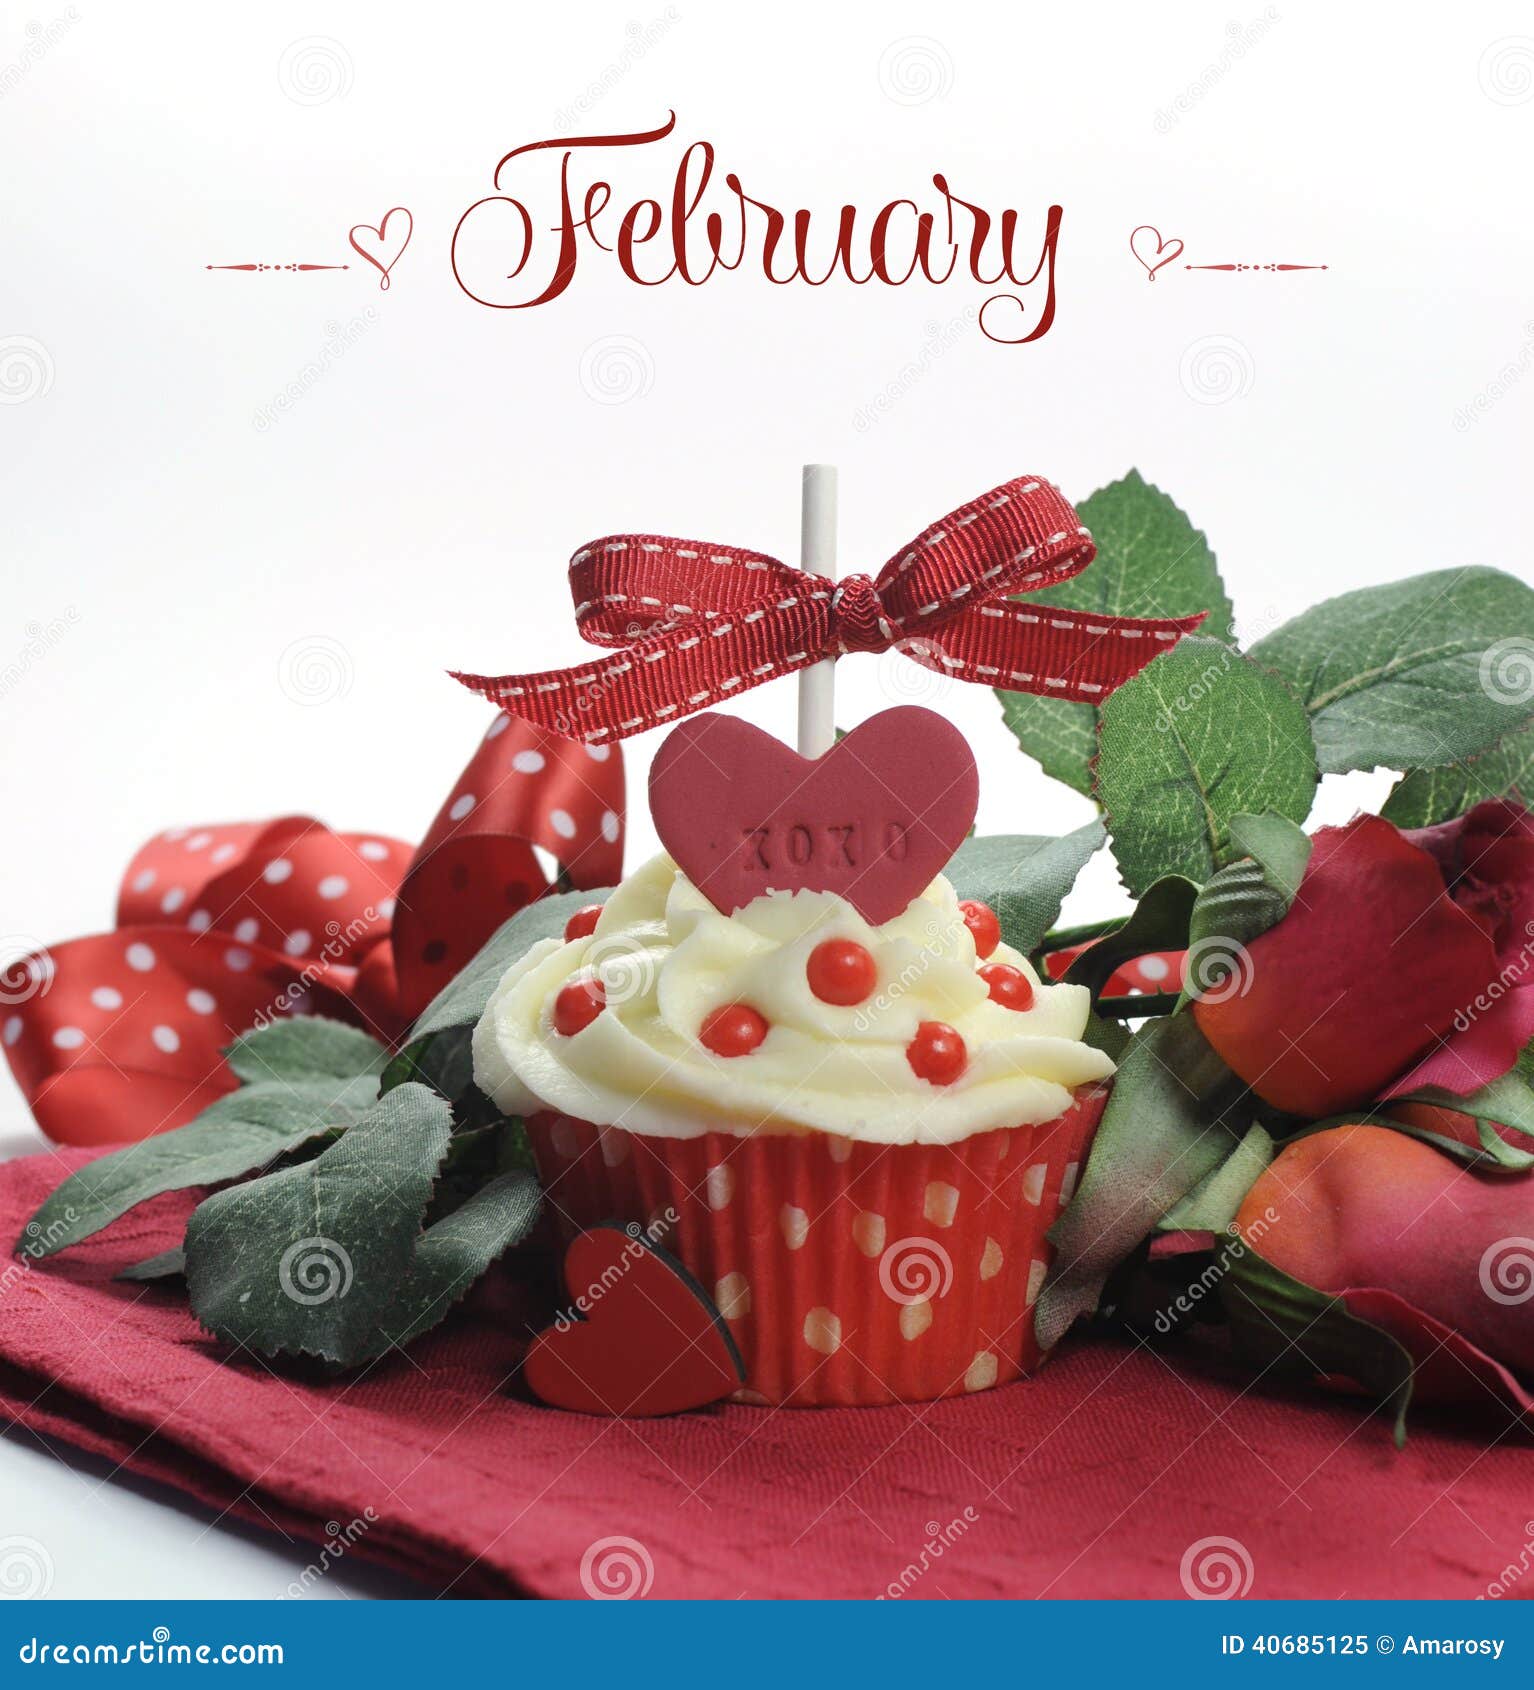 beautiful red heart valentine theme cupcake with roses and decorations for the month of february